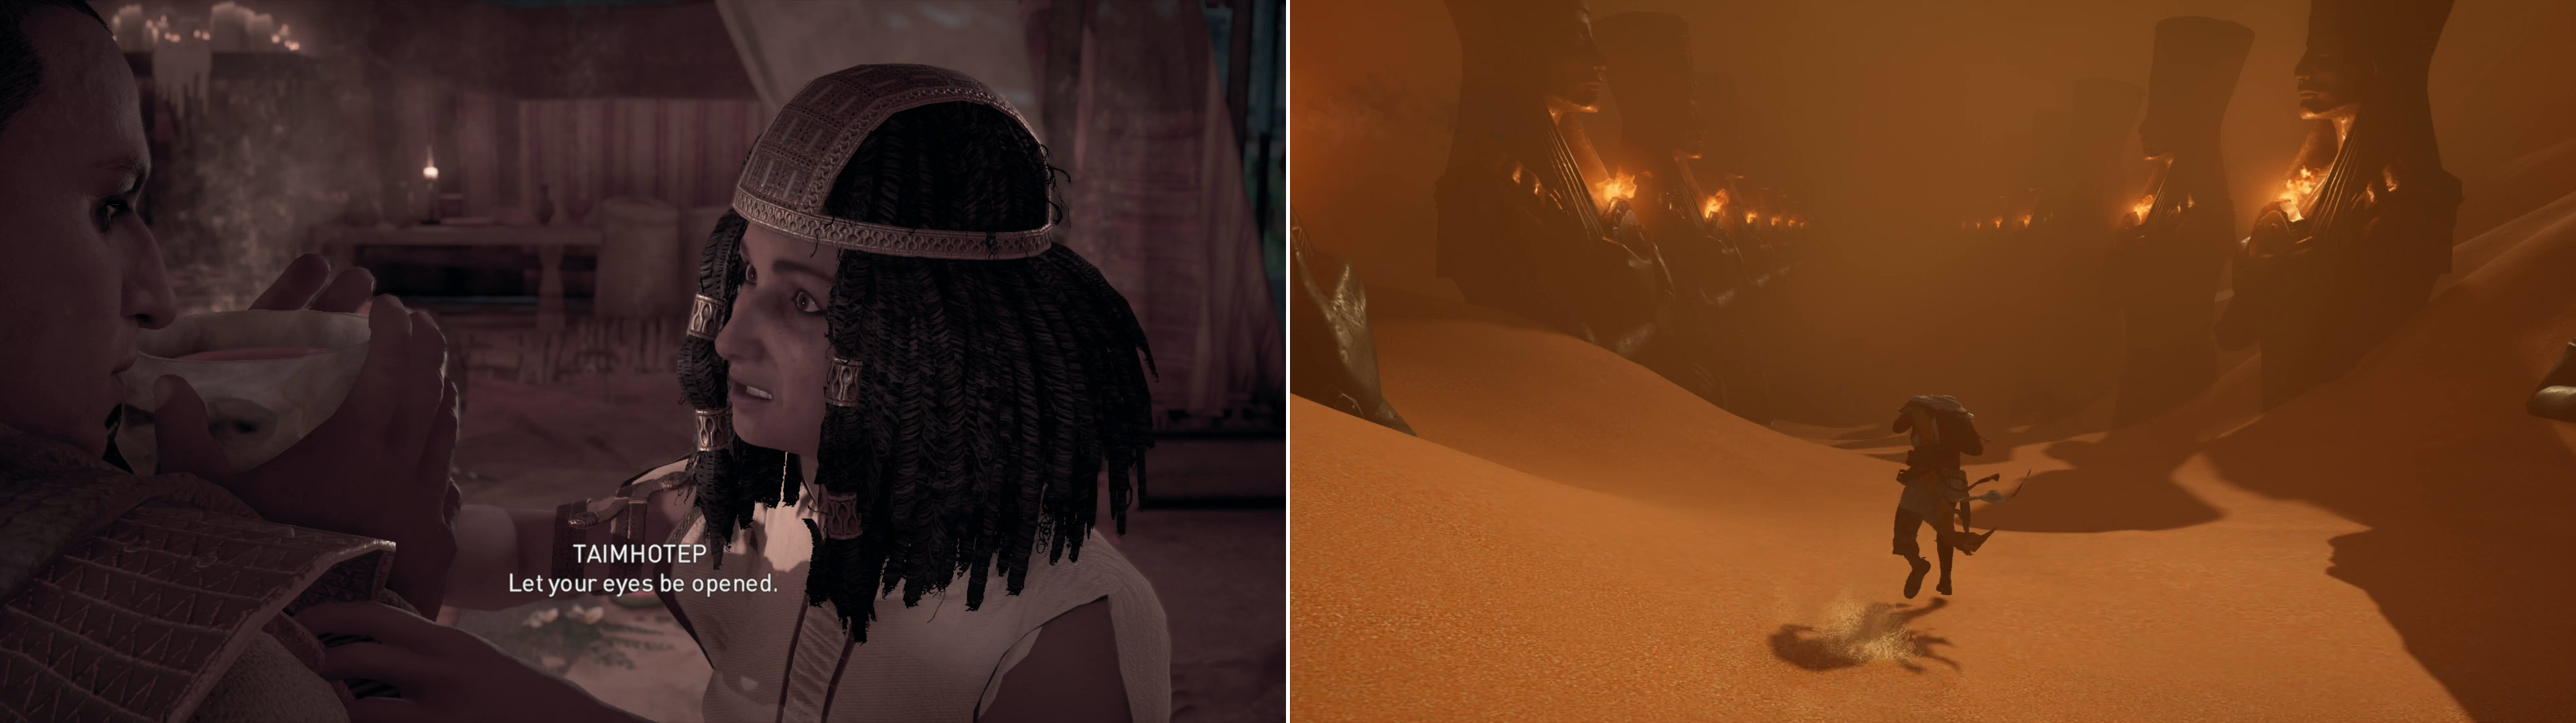 When you arrive at the seer’s house, Taimhotep will force Bayek to drink some decoction (left). Make your way through the sands of the dreamscape and into a foreboding shrine (right).